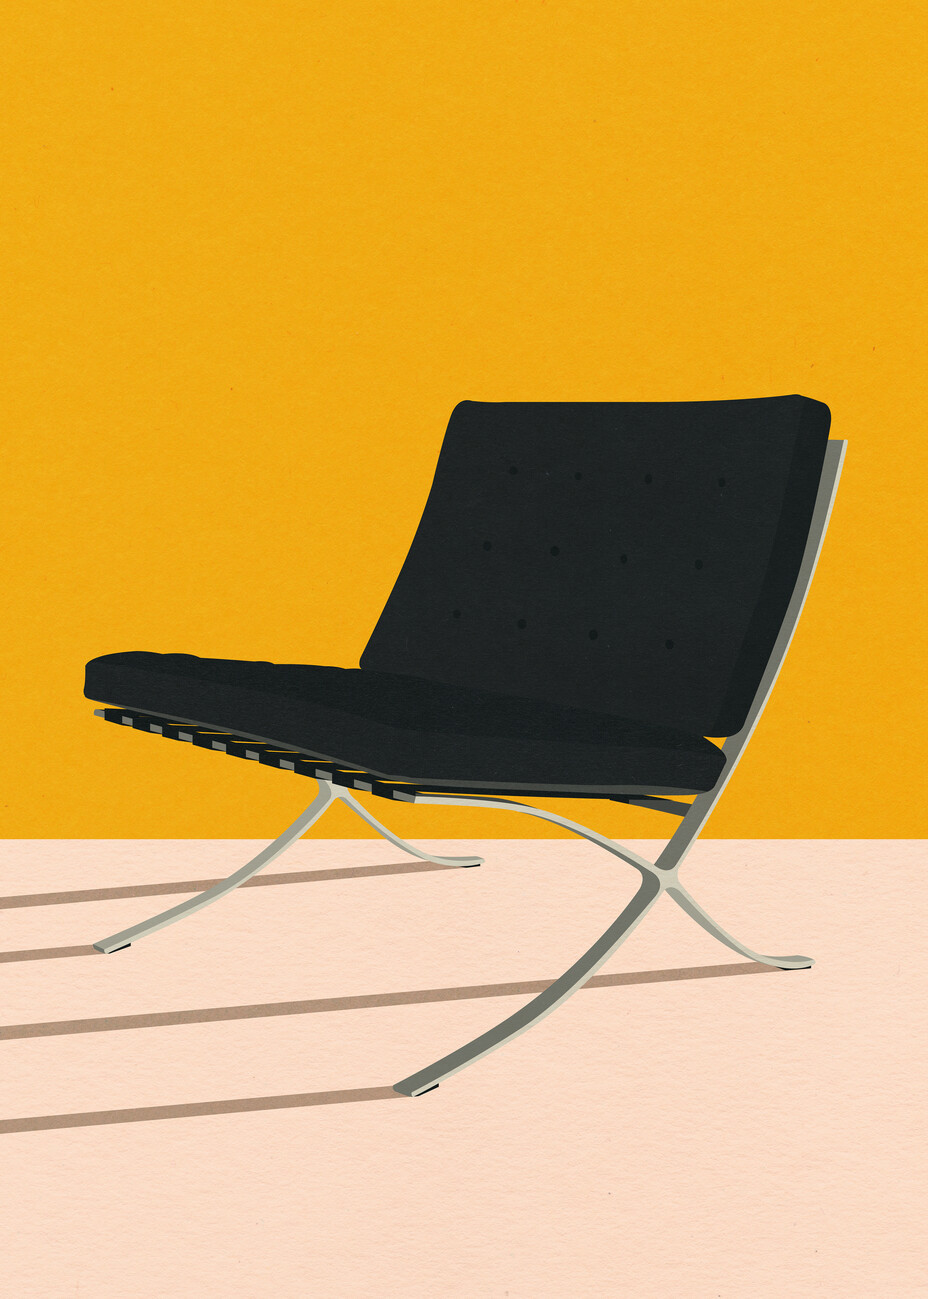 Rosi Feist Ilustrace Barcelona Chair By Mies Van Der Rohe, Rosi Feist, (30 x 40 cm)